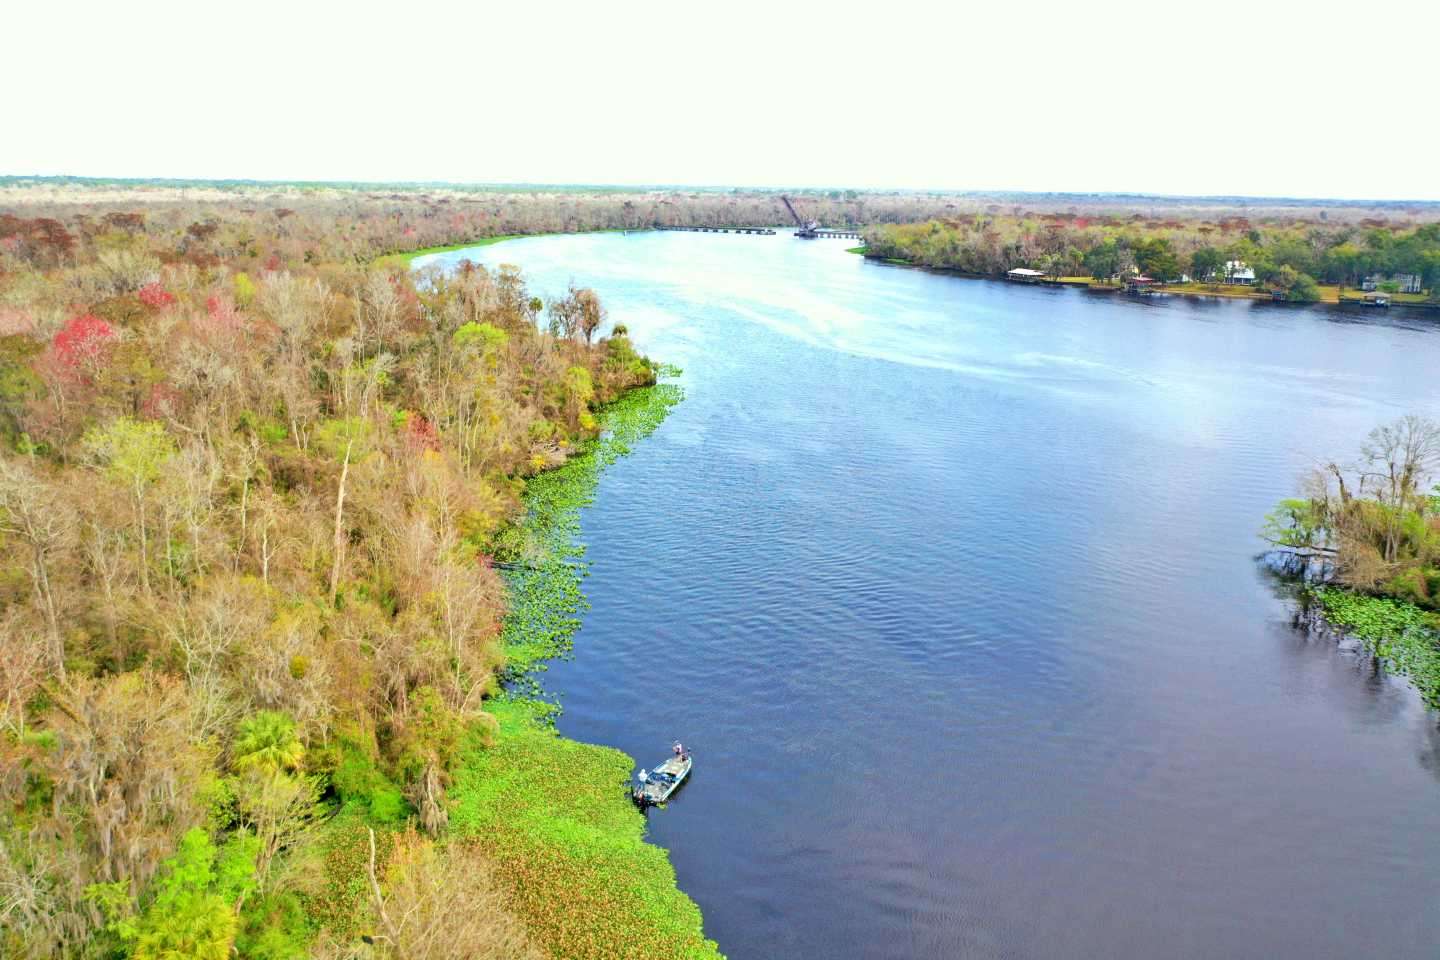 In the background, the St. Johns River meanders toward Palatka. 